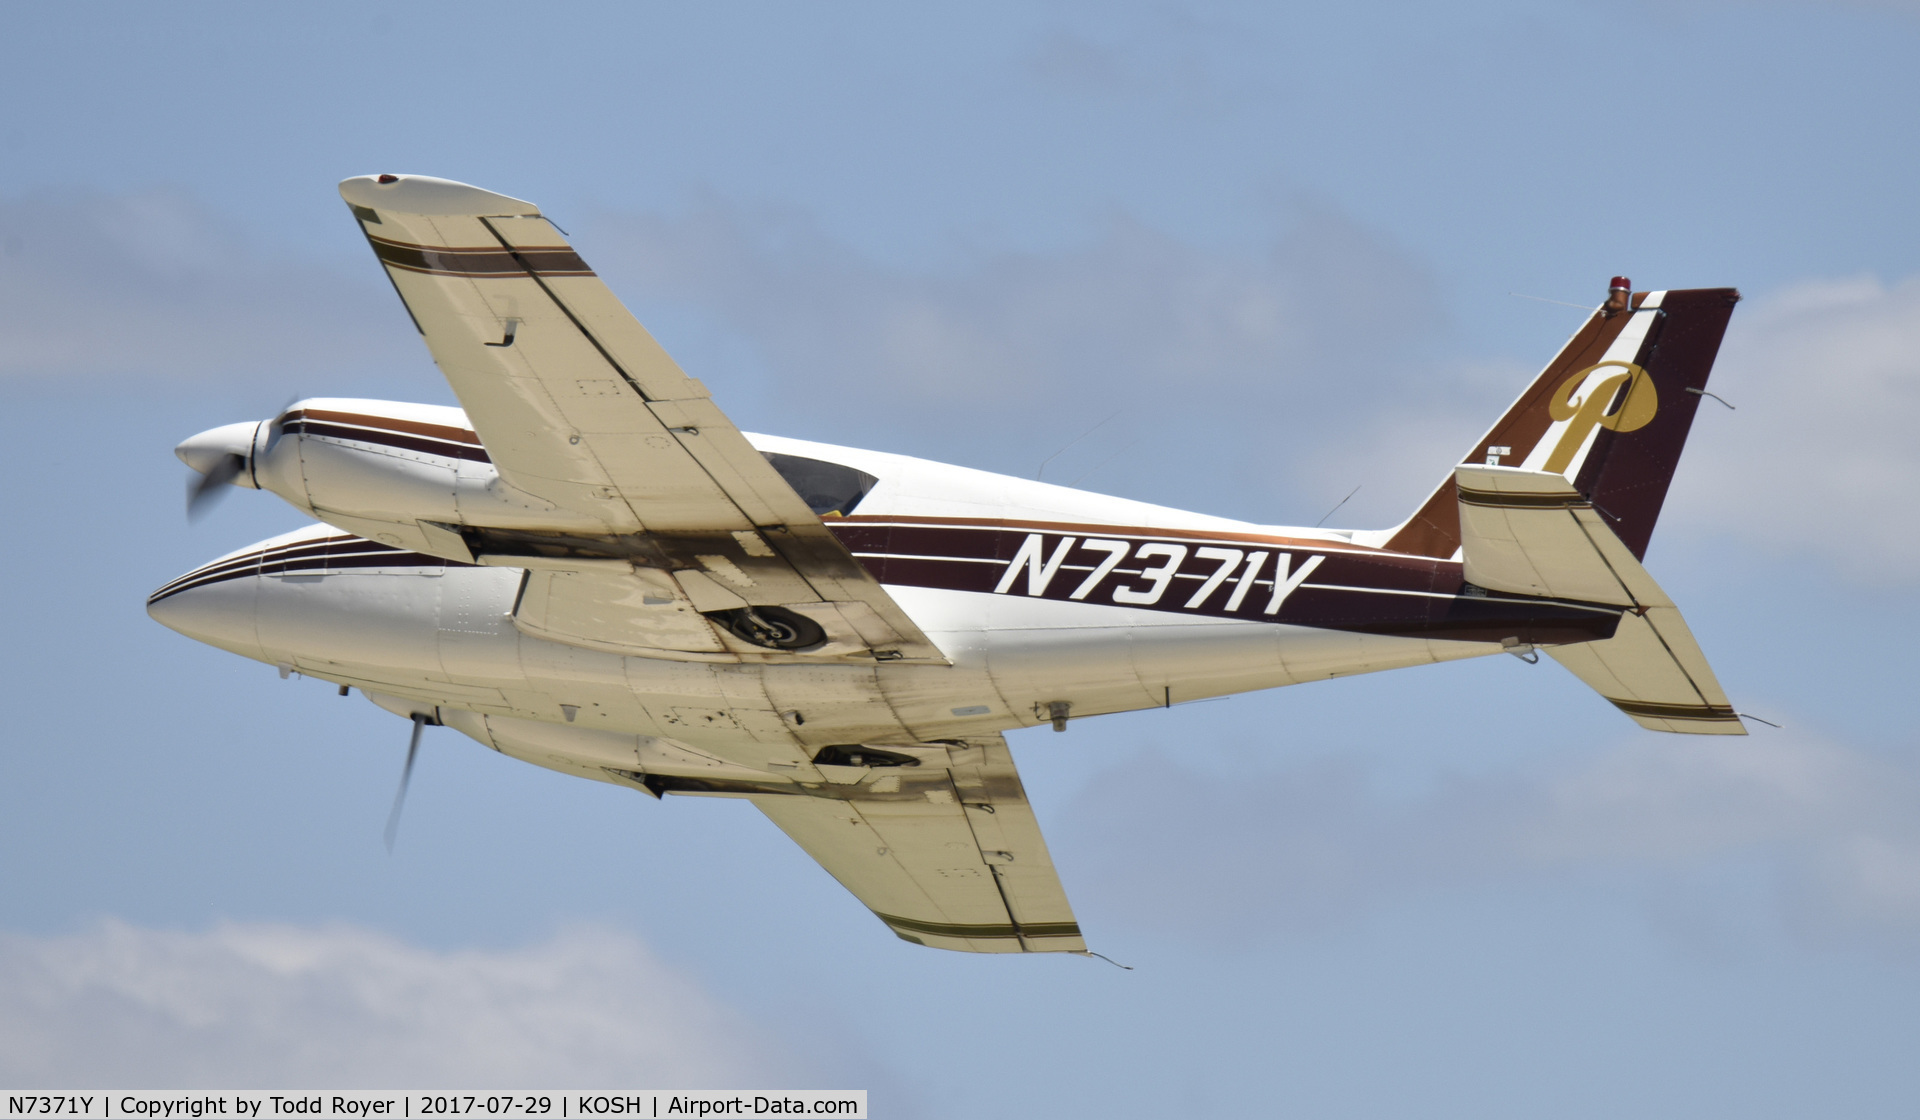 N7371Y, 1964 Piper PA-30 Twin Comanche C/N 30-423, Airventure 2017